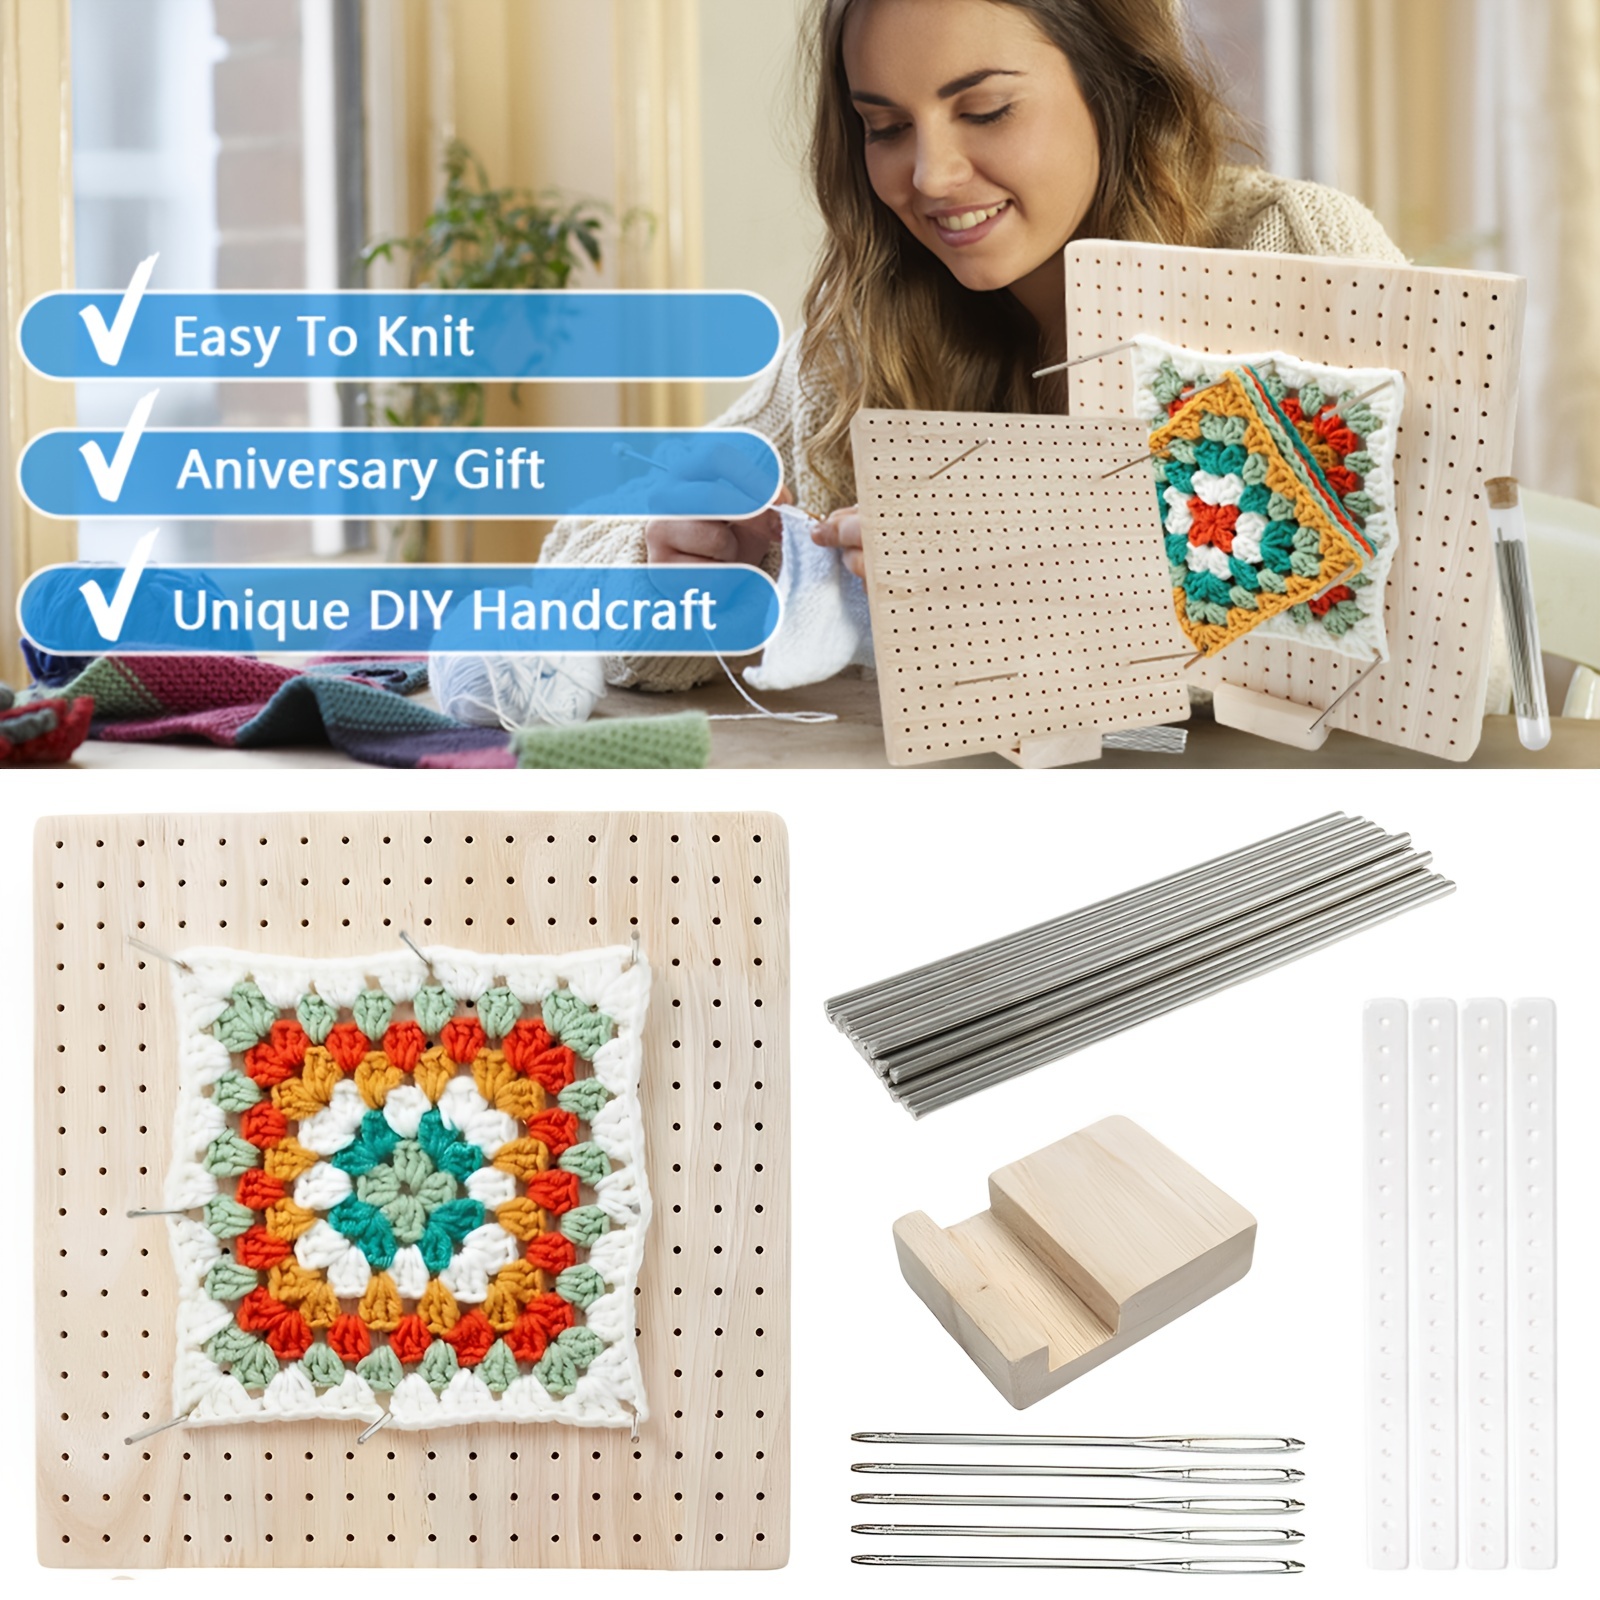 Wooden Crochet Blocking Board Reusable Handcrafted Knitting Blocking Mat  for Knitting Grannys Square NeedleworksLovers Blocking Board for Crocheting